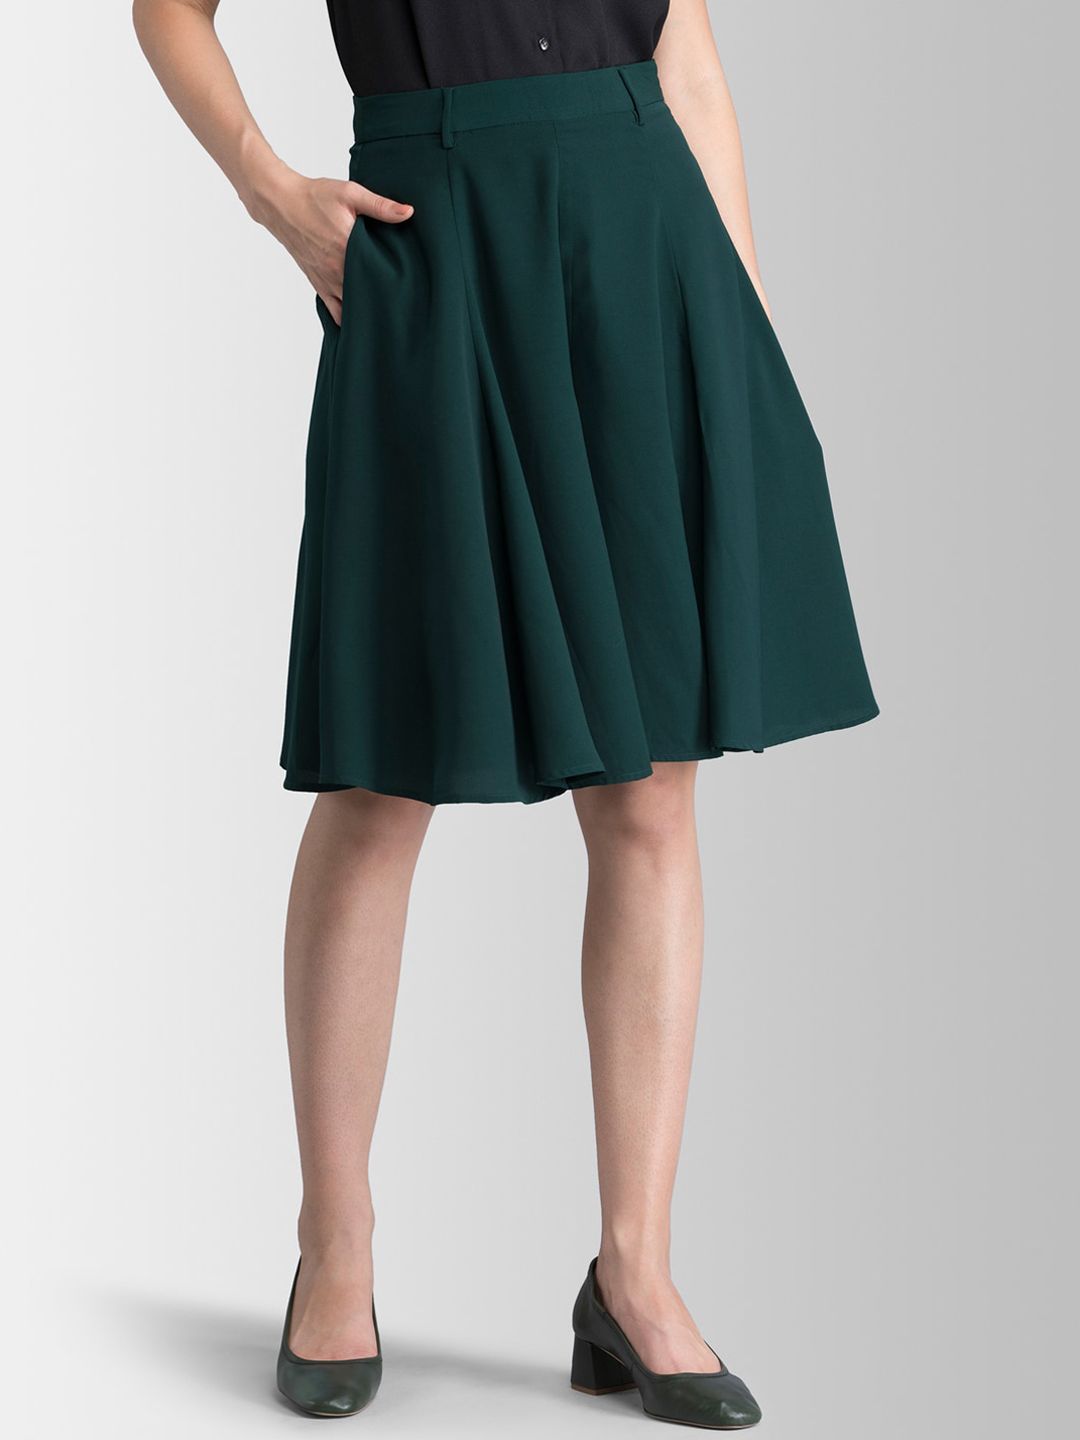 FableStreet Green Knee-Length Flared Skorts Price in India